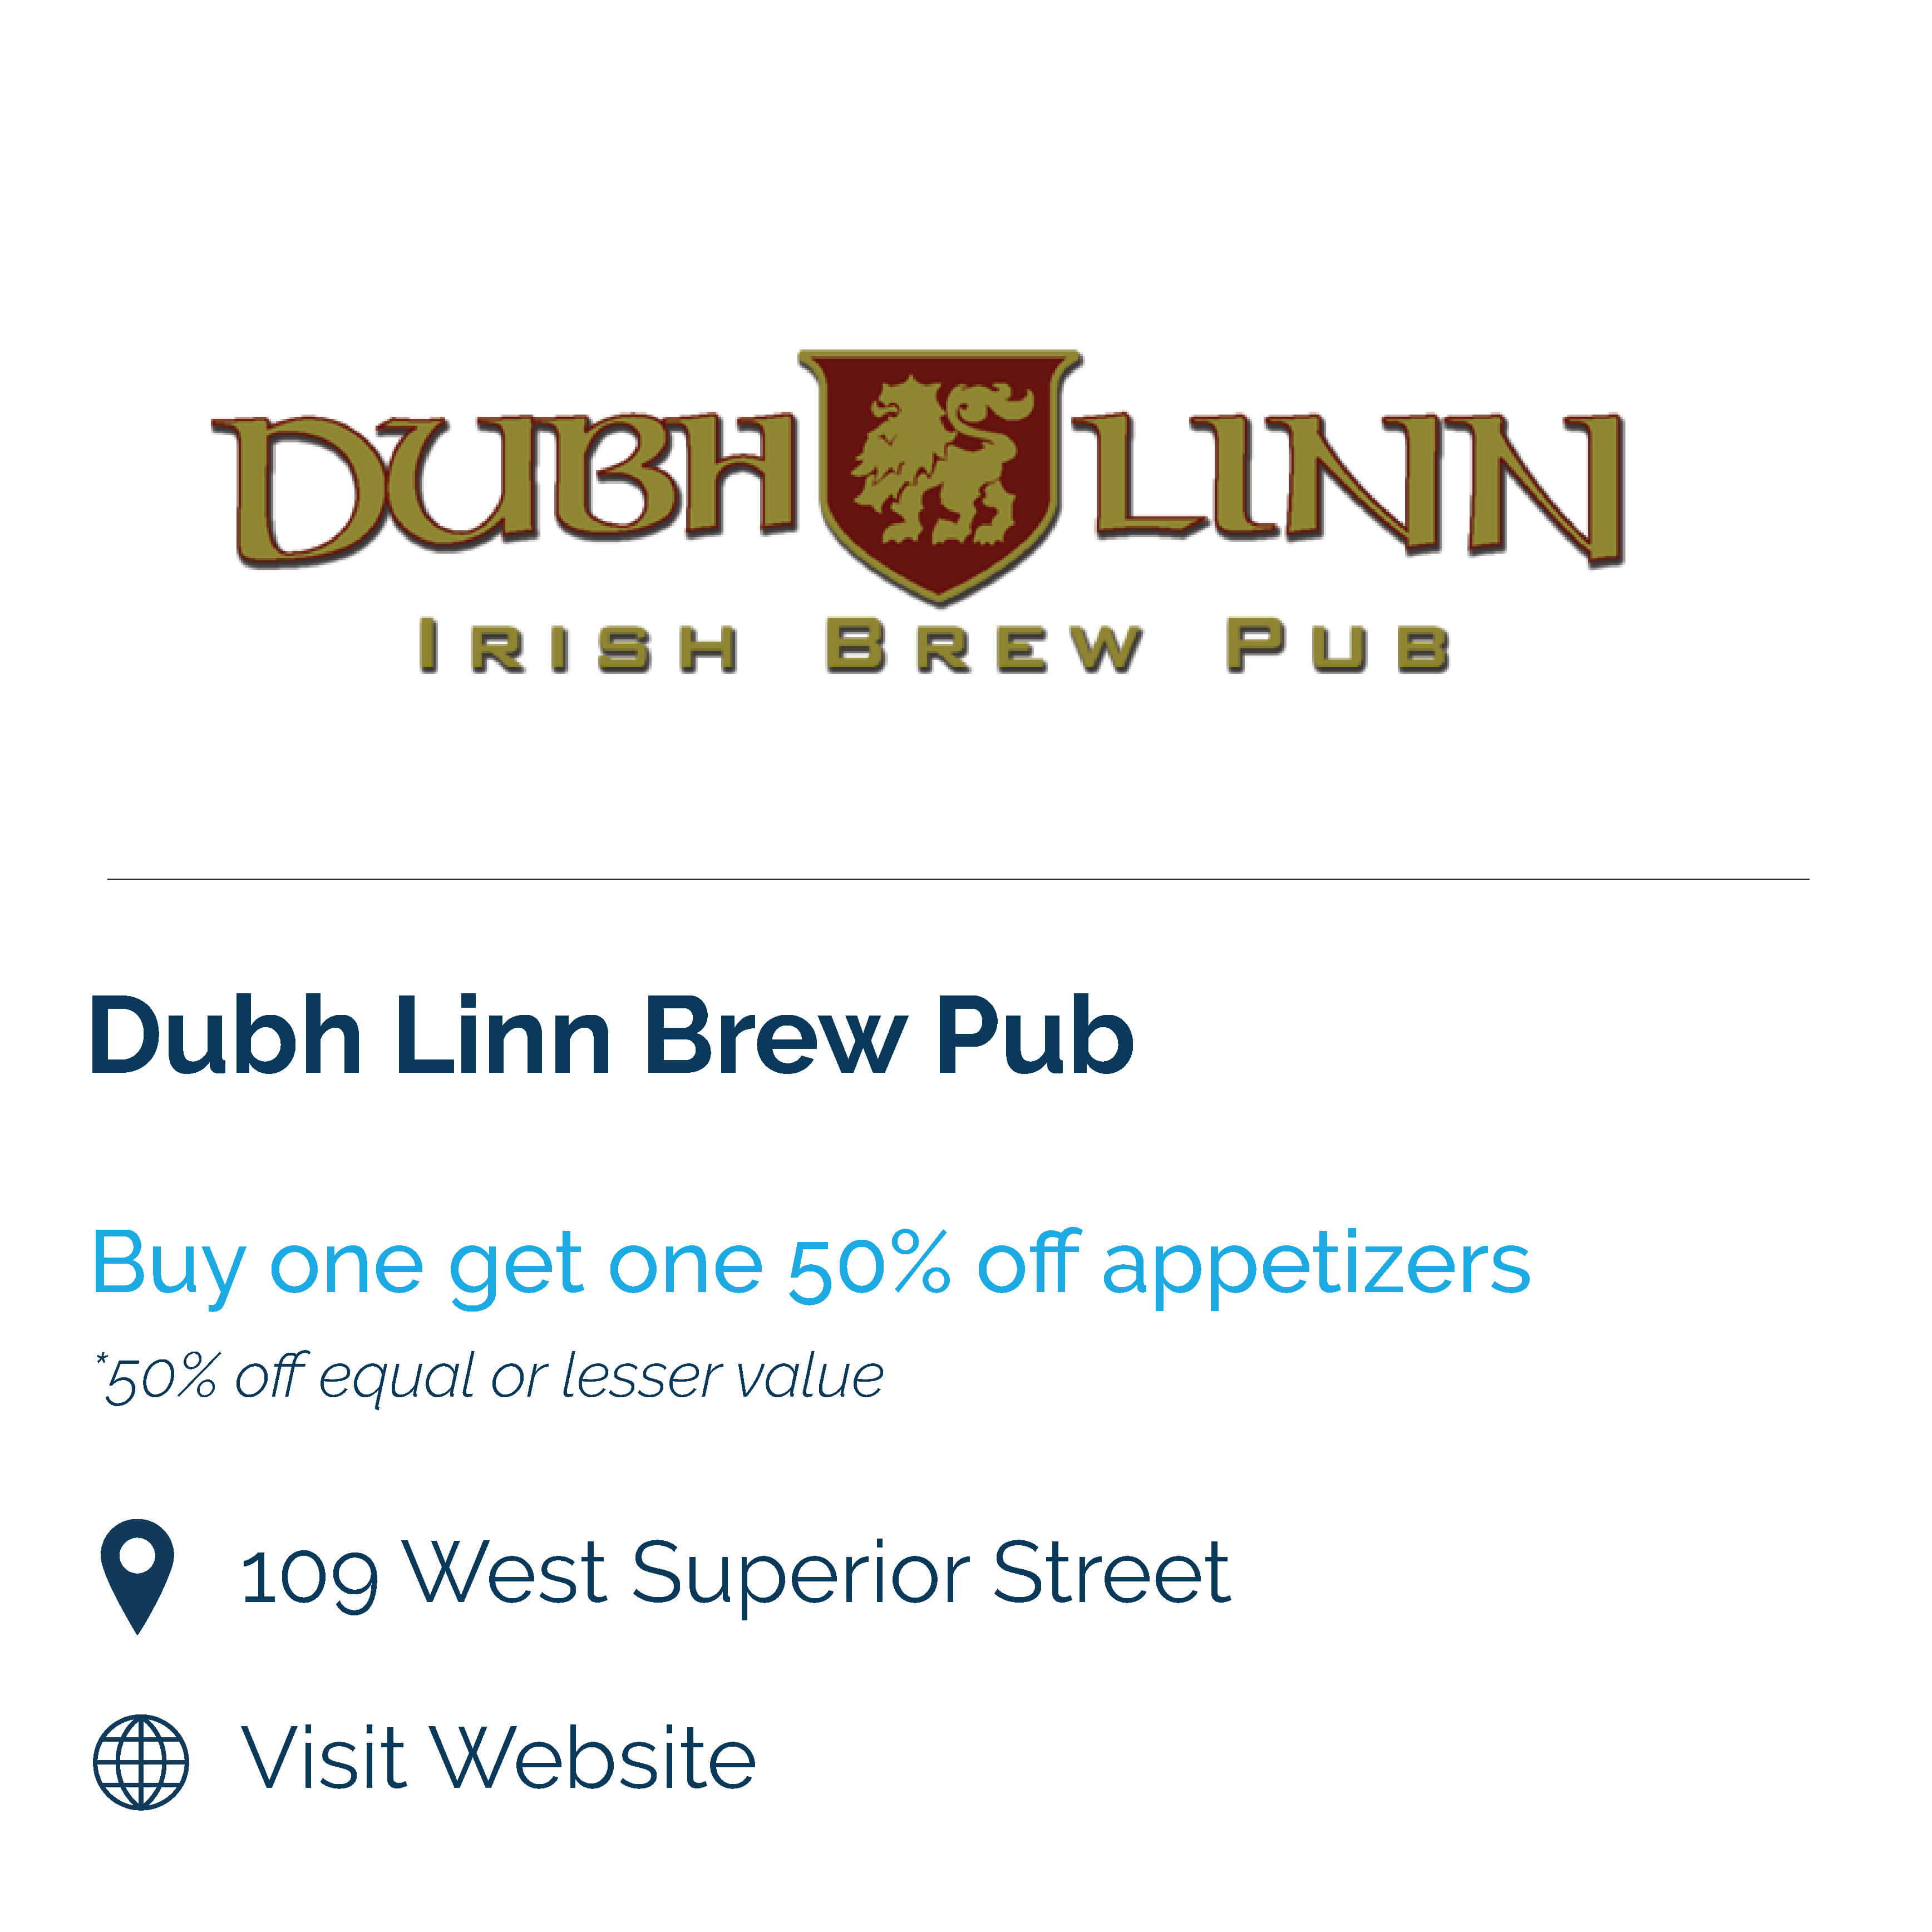 dubh linn brew pub. buy one get one 50% off appetizers. 50% off equal or lesser value. 109 west superior street